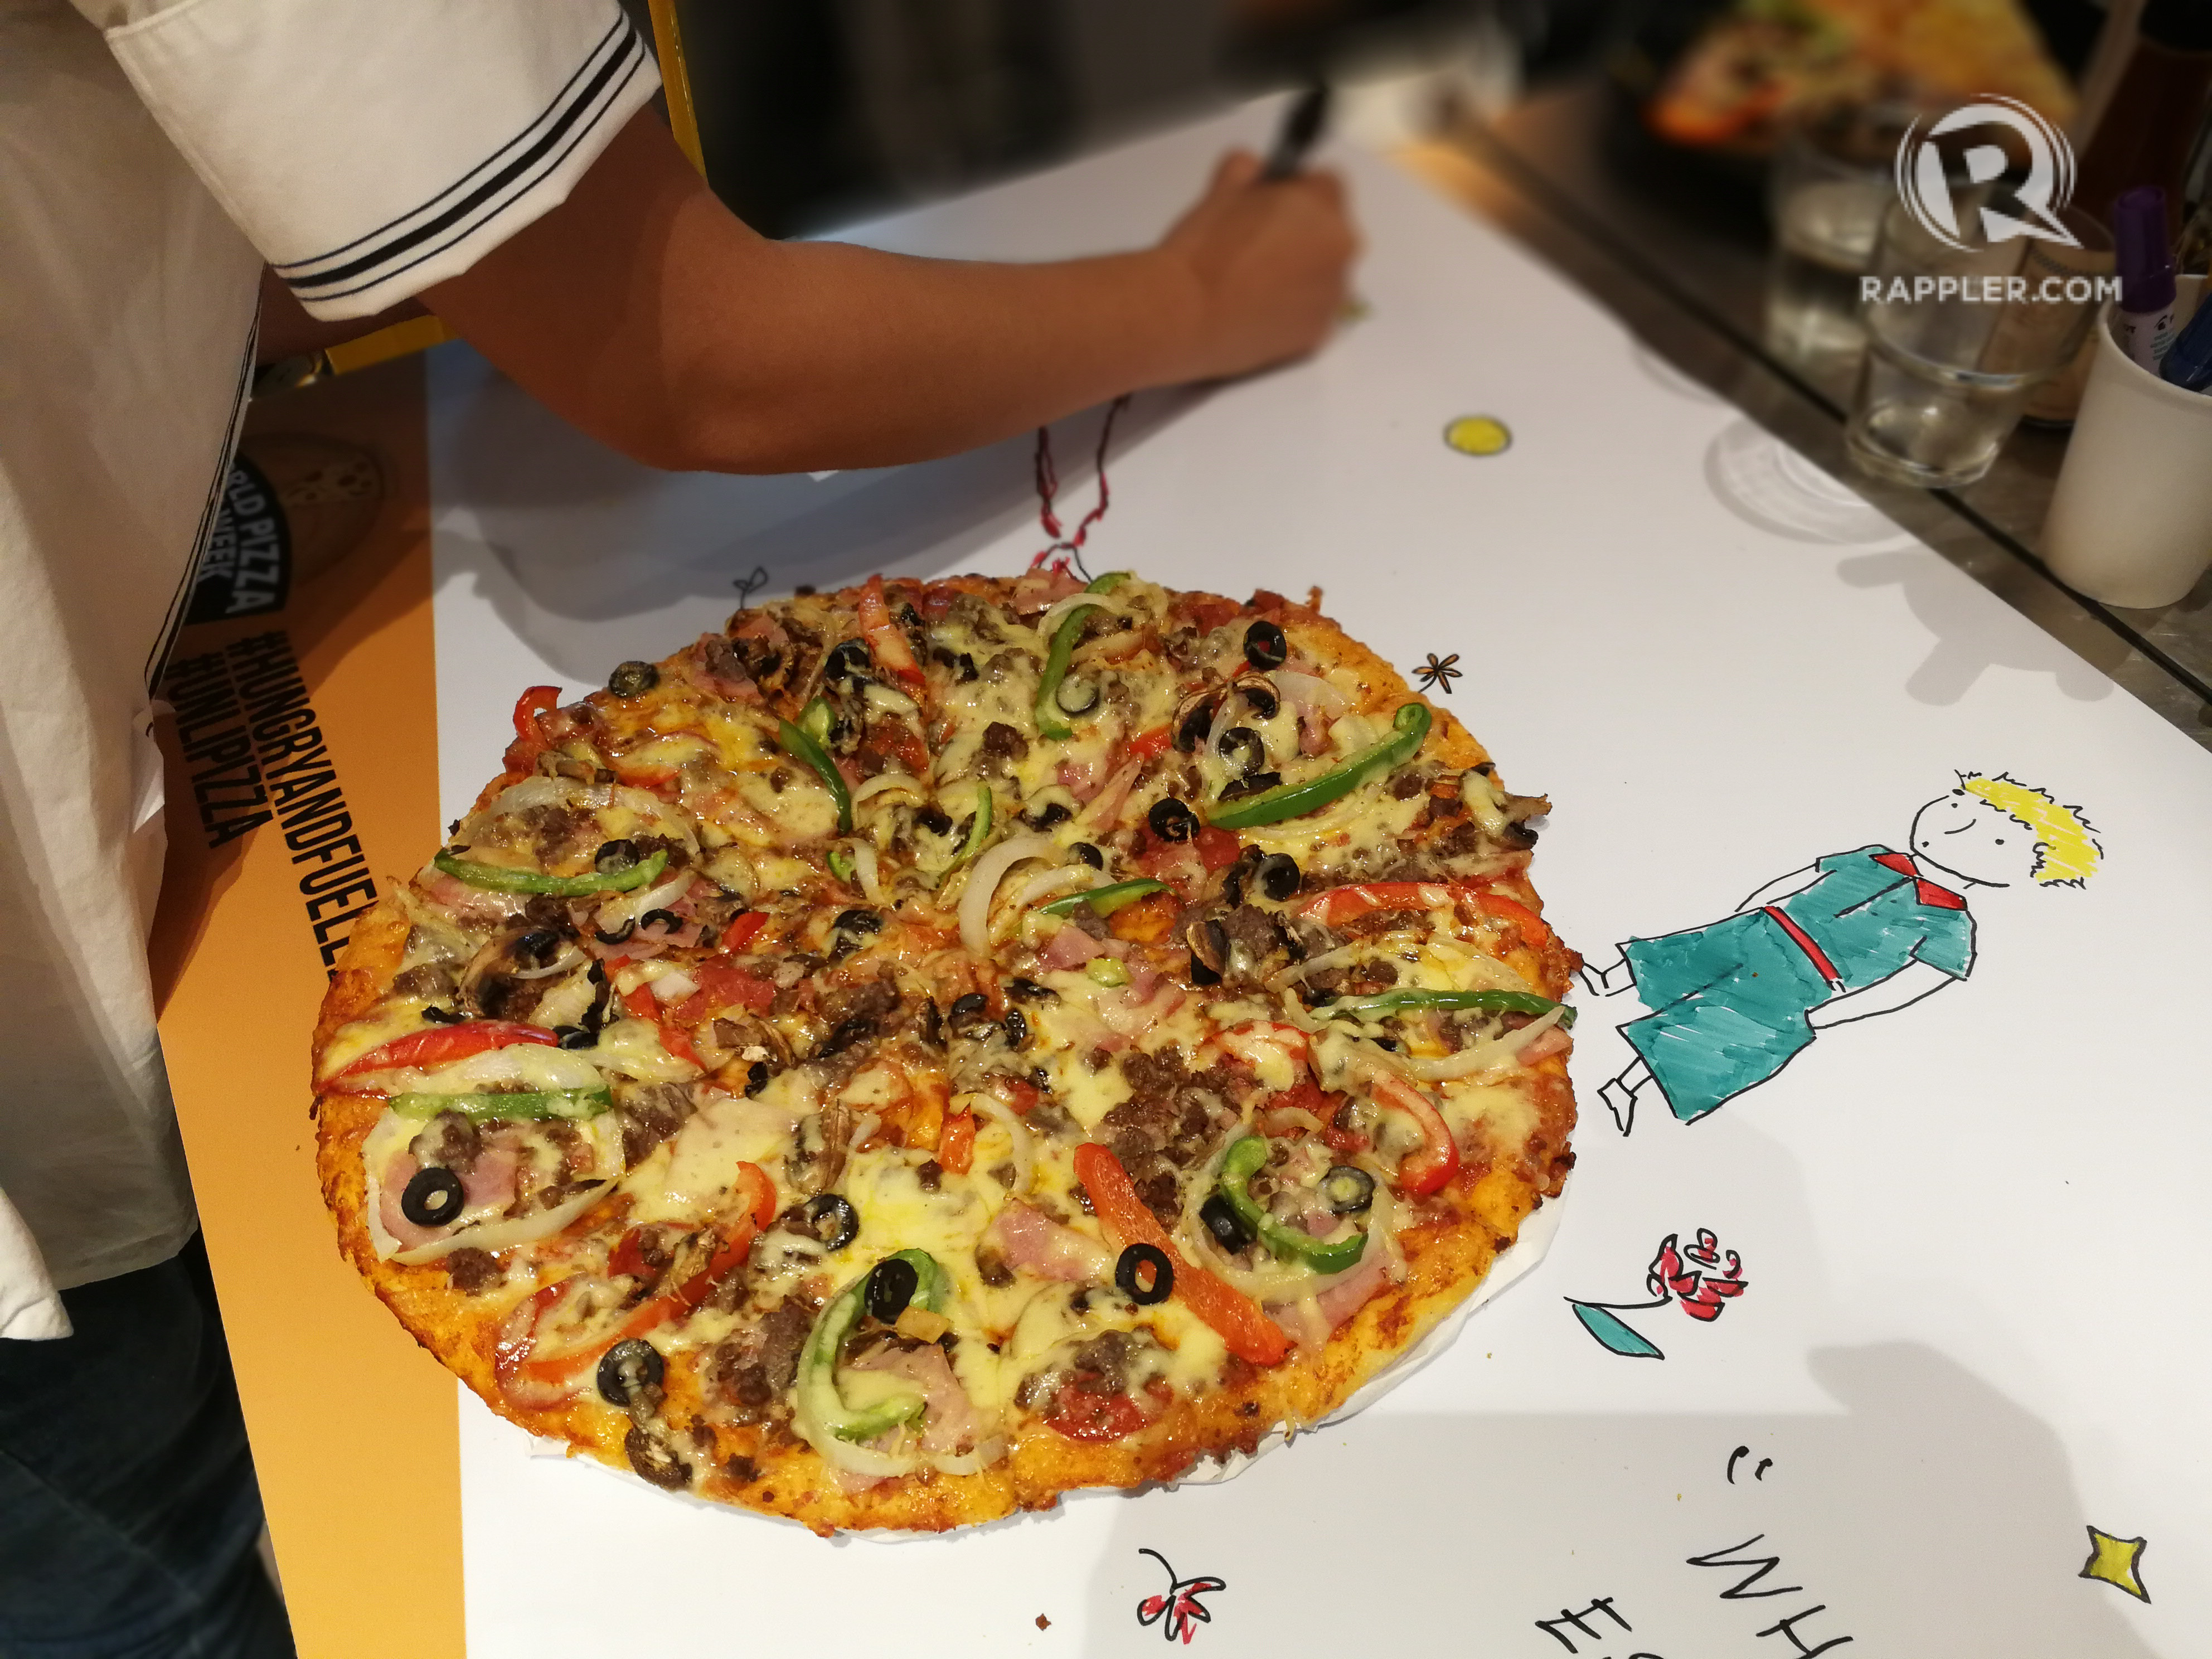 Mark your calendars! Yellow Cab will satisfy your pizza cravings this month